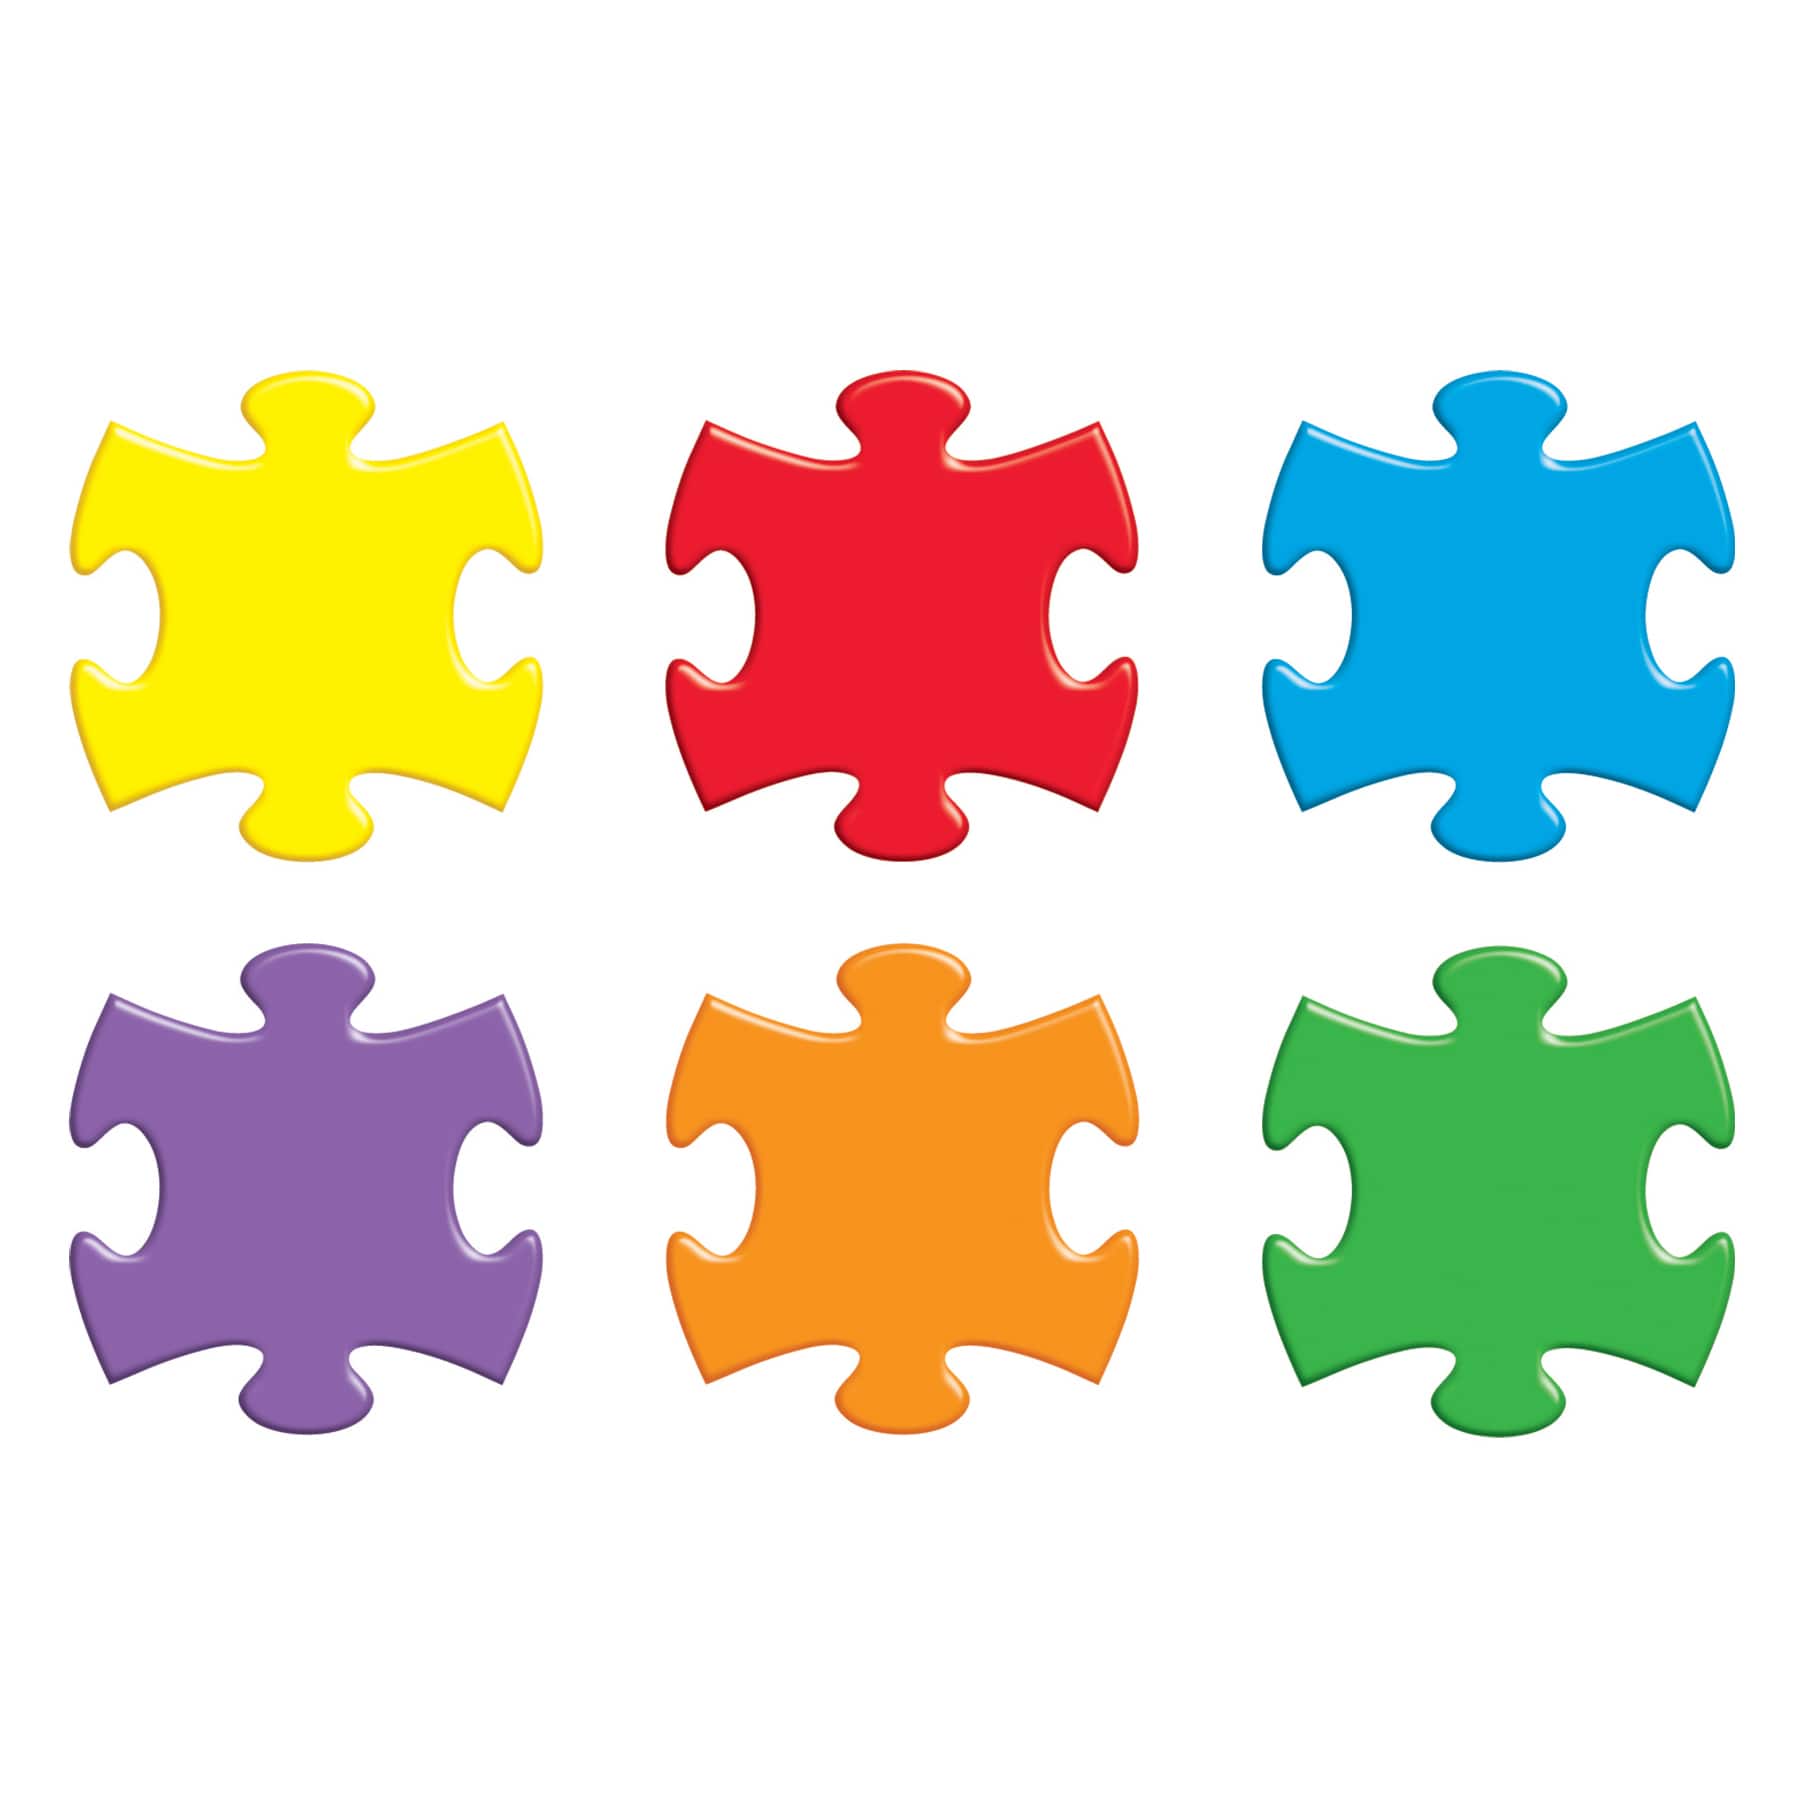 Puzzle Pieces Classic Accents&#xAE; Variety Pack, 36 Per Pack, 6 Packs